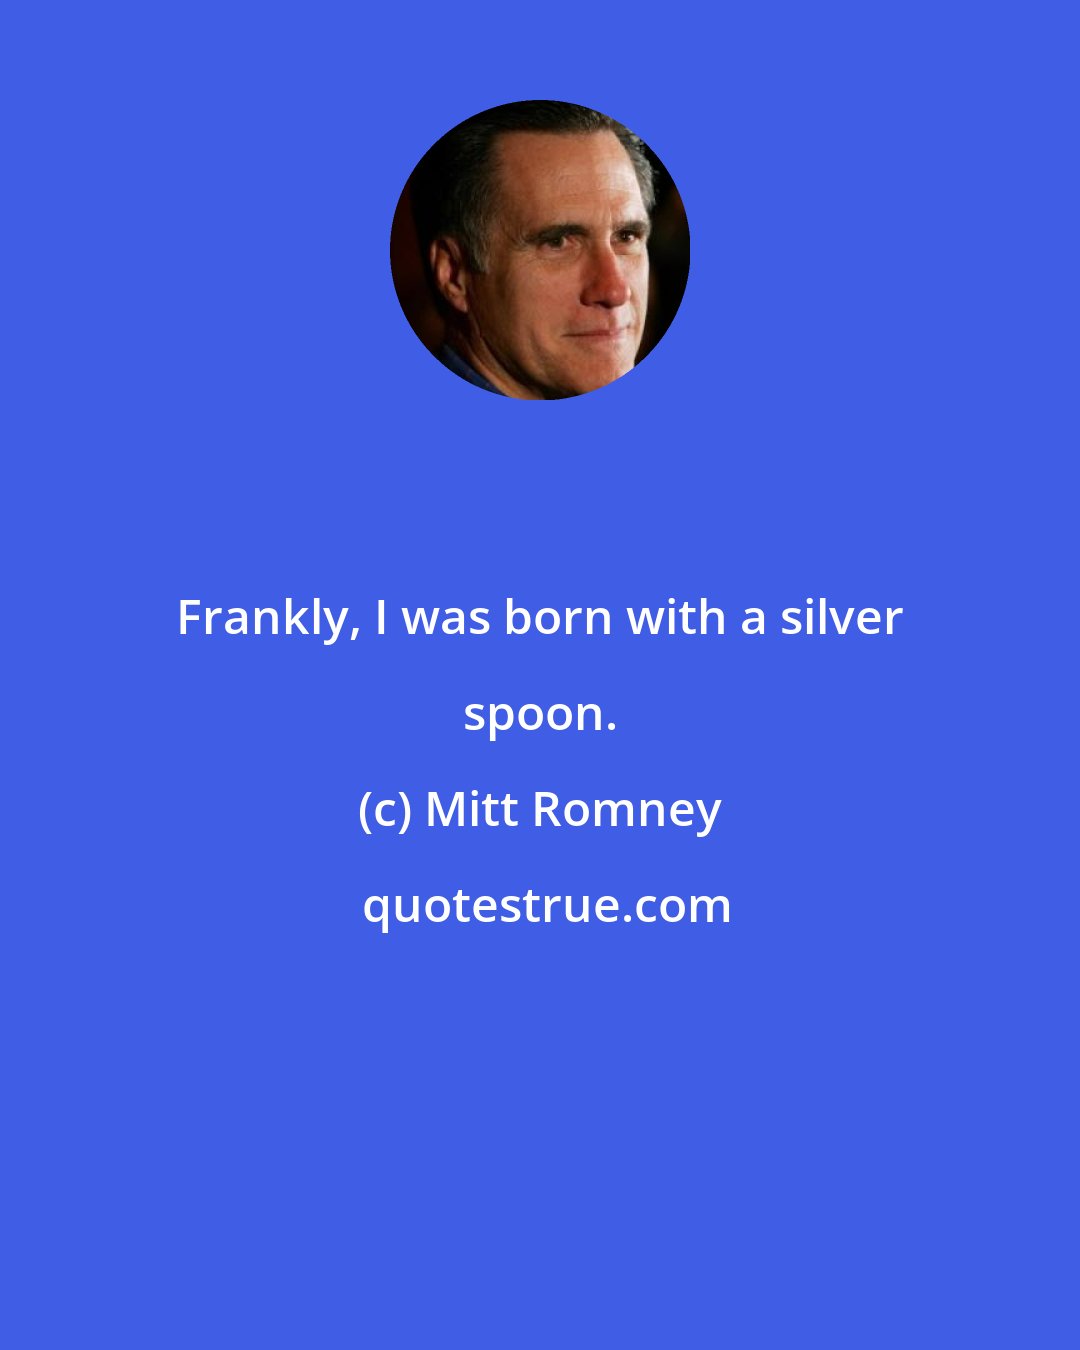 Mitt Romney: Frankly, I was born with a silver spoon.